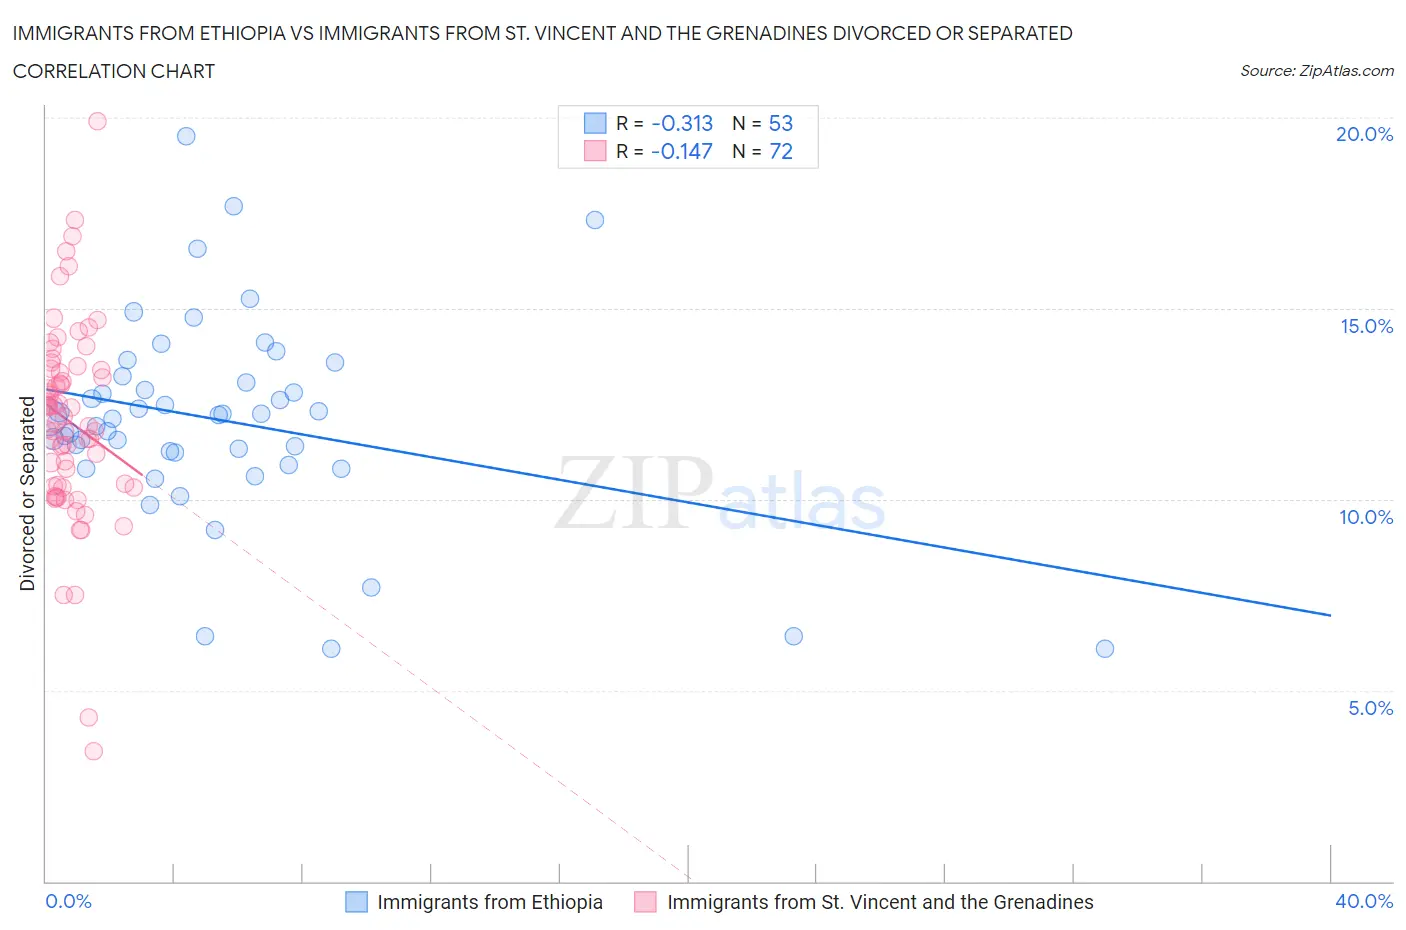 Immigrants from Ethiopia vs Immigrants from St. Vincent and the Grenadines Divorced or Separated